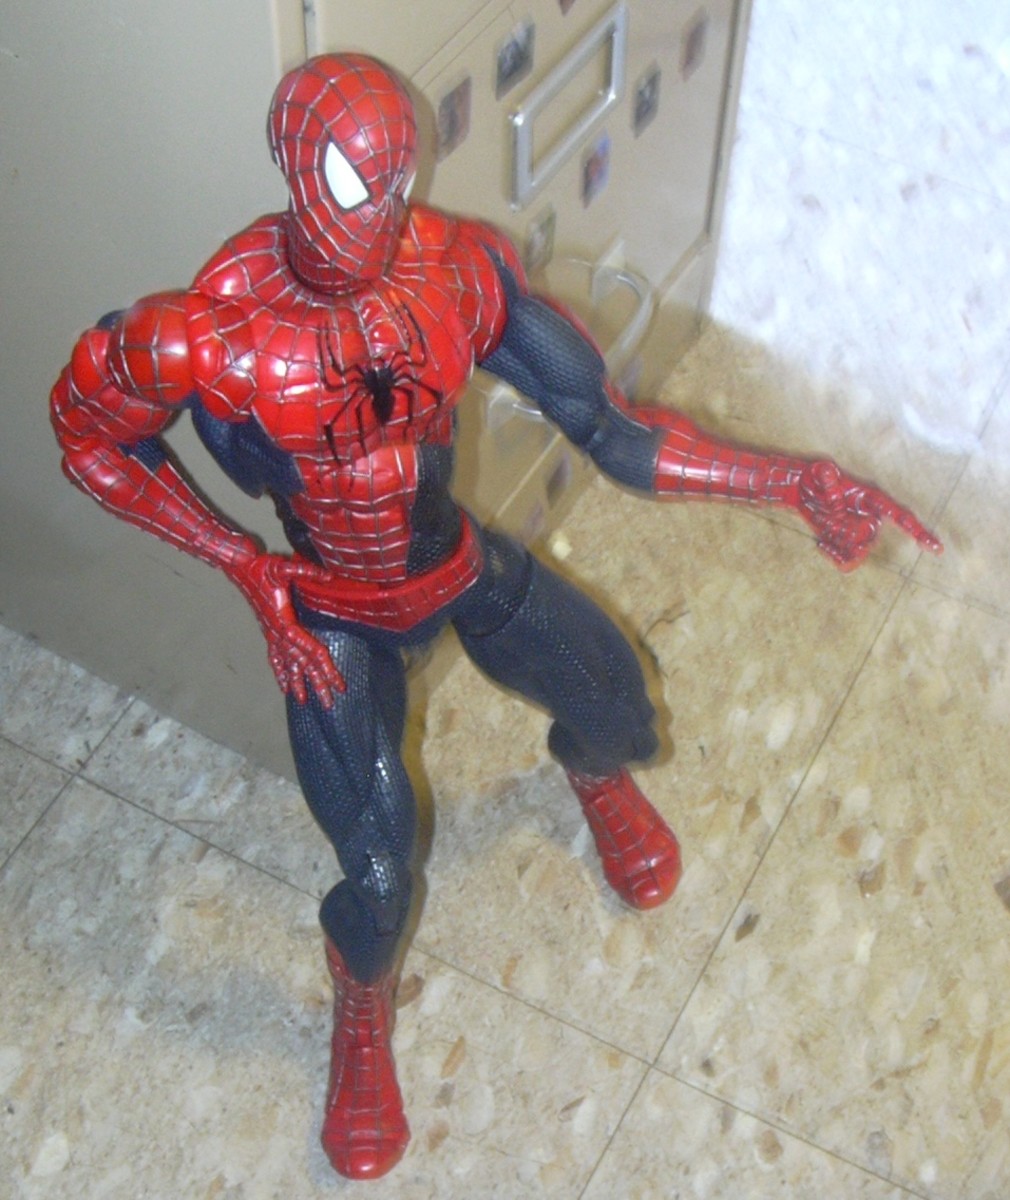 Another pointing Spider-Man...